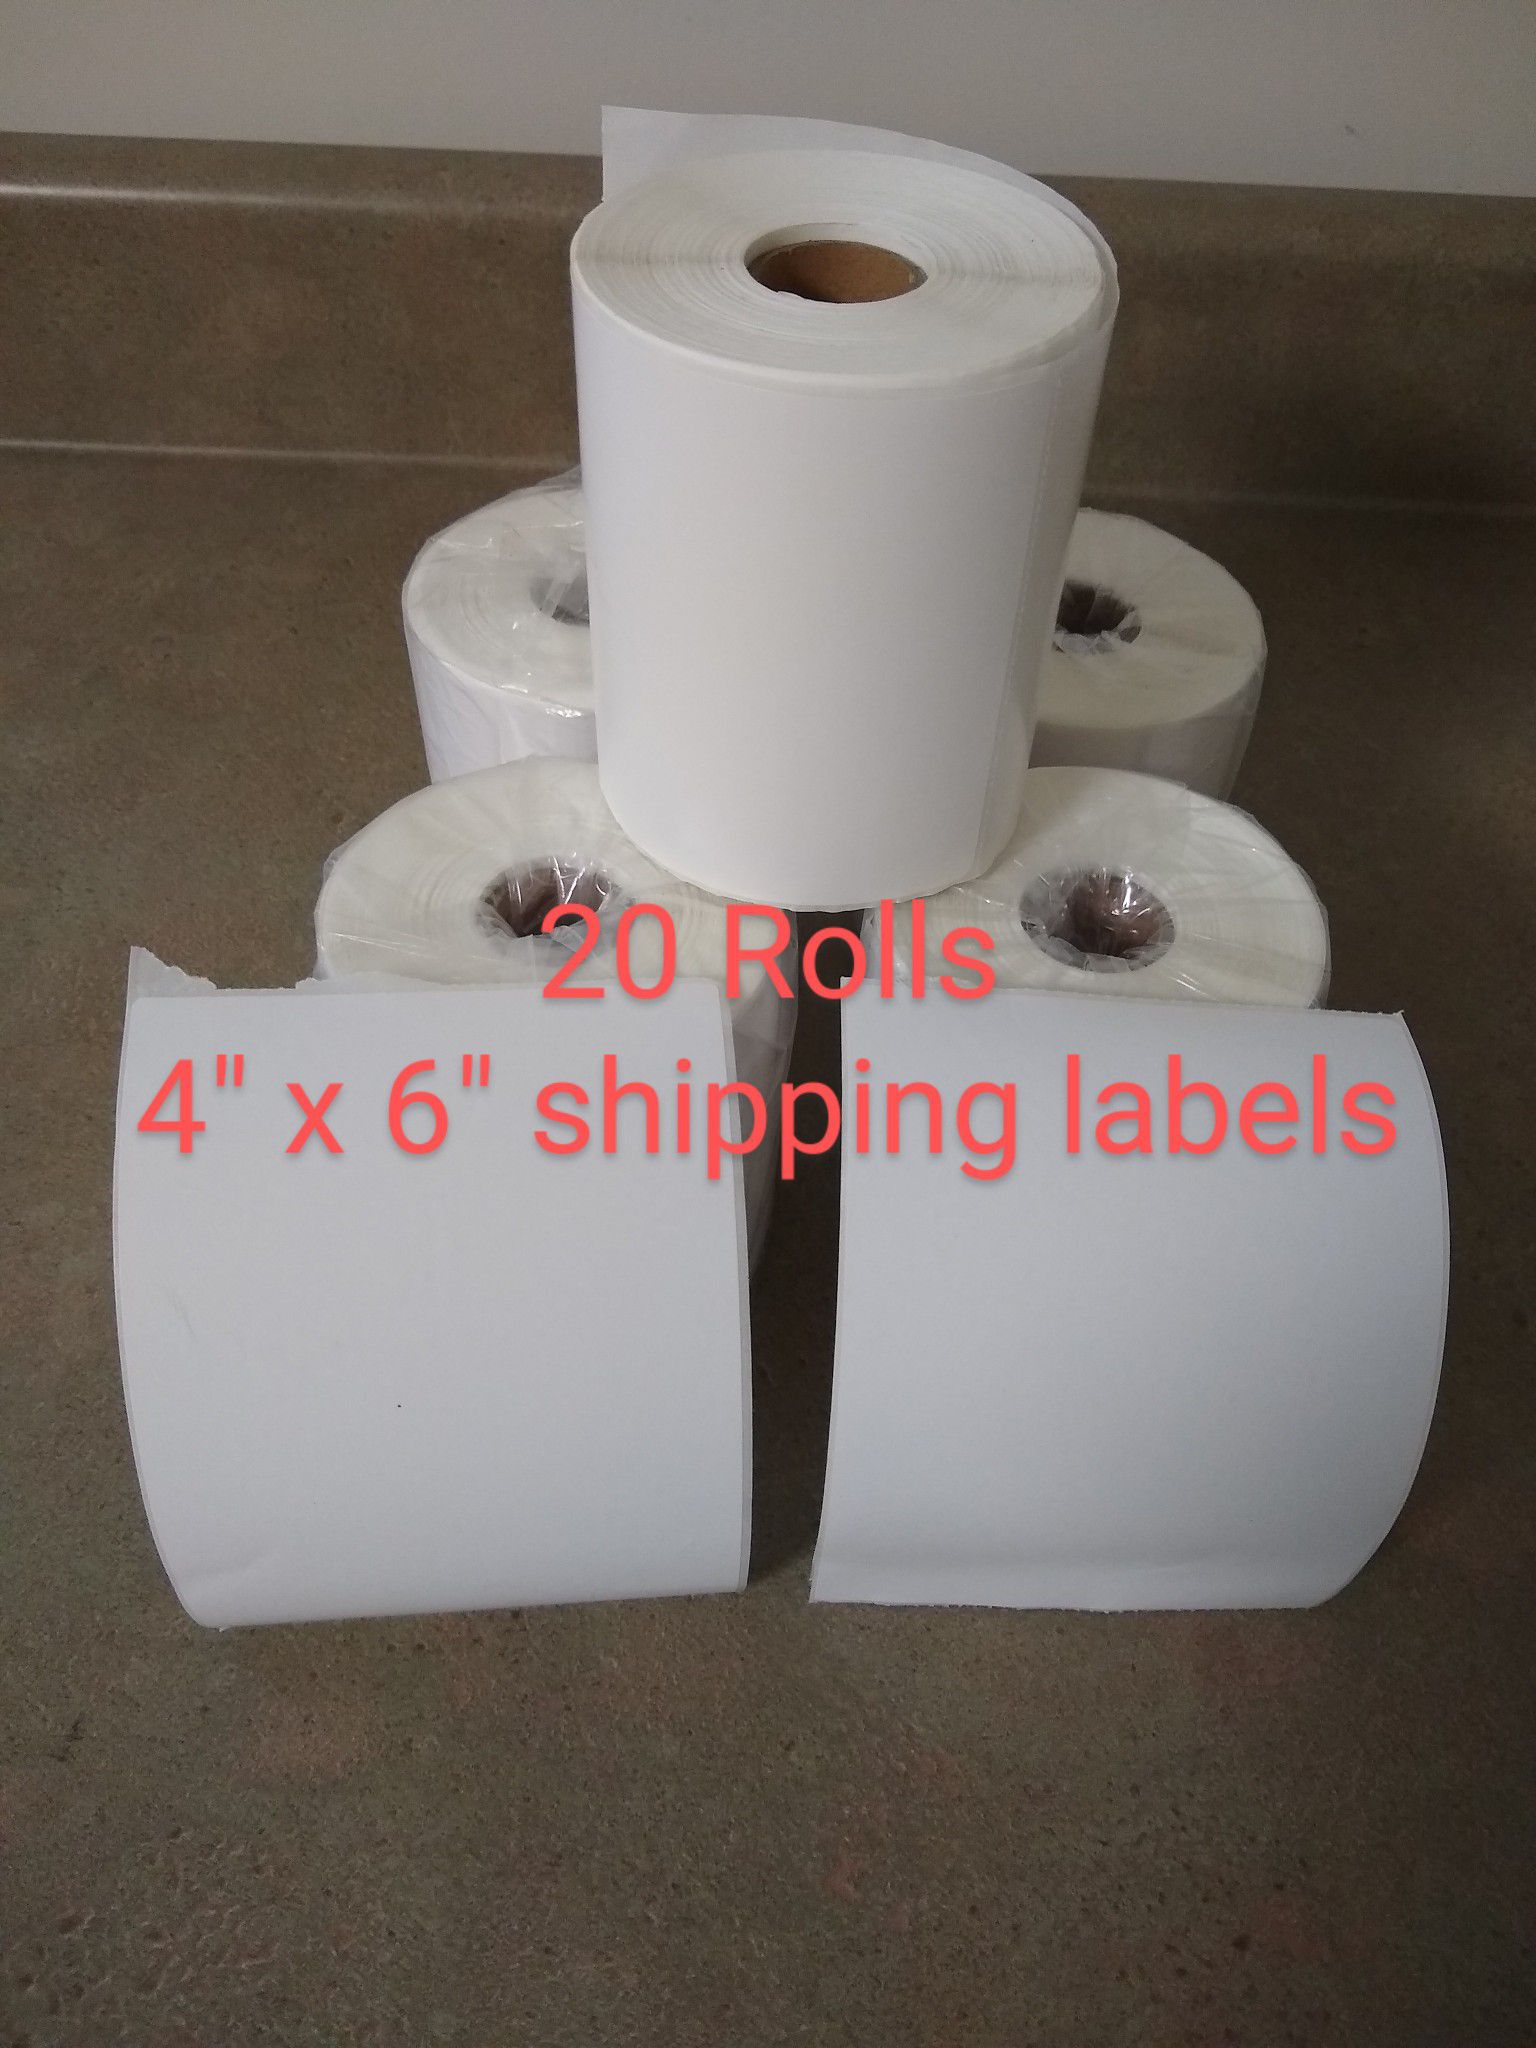 4 x 6 Thermal labels, 20 rolls - 250 labels by roll